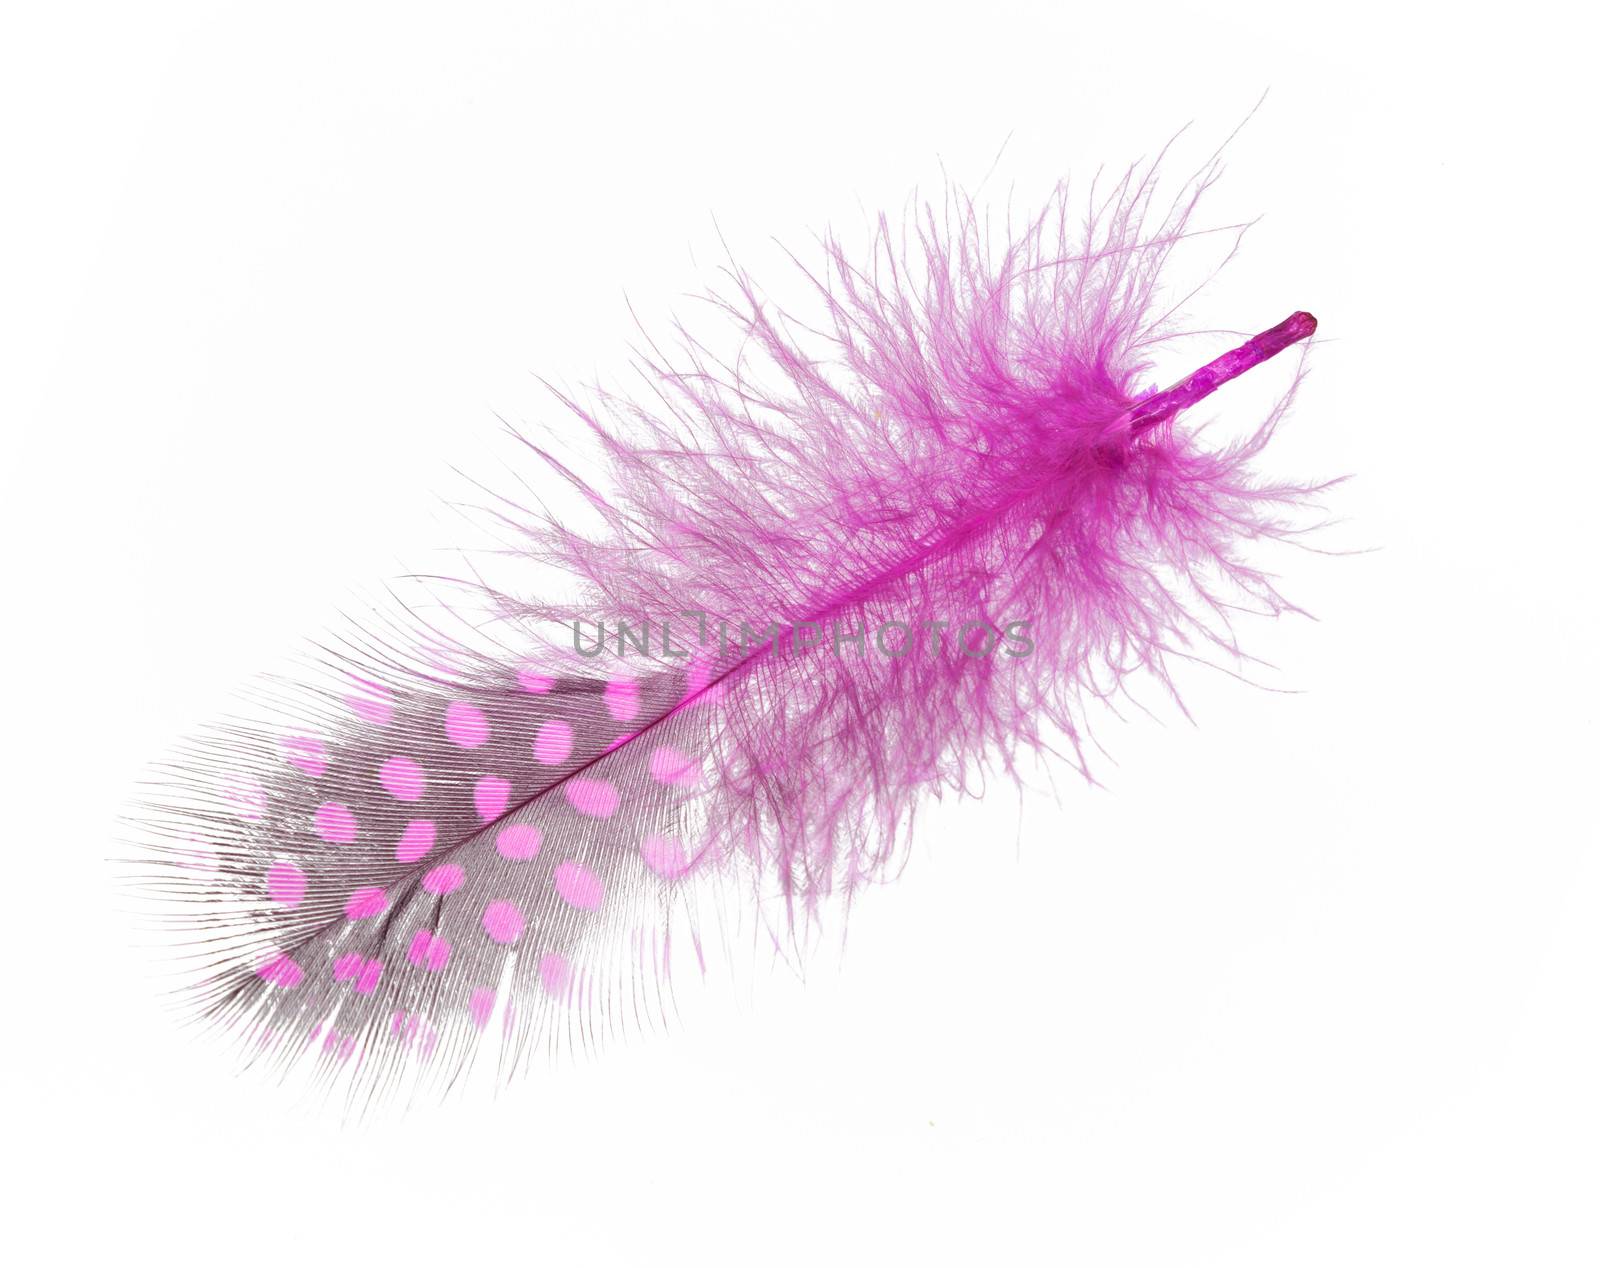 Guinea fowl feather in purple on a white background by AleksandrN